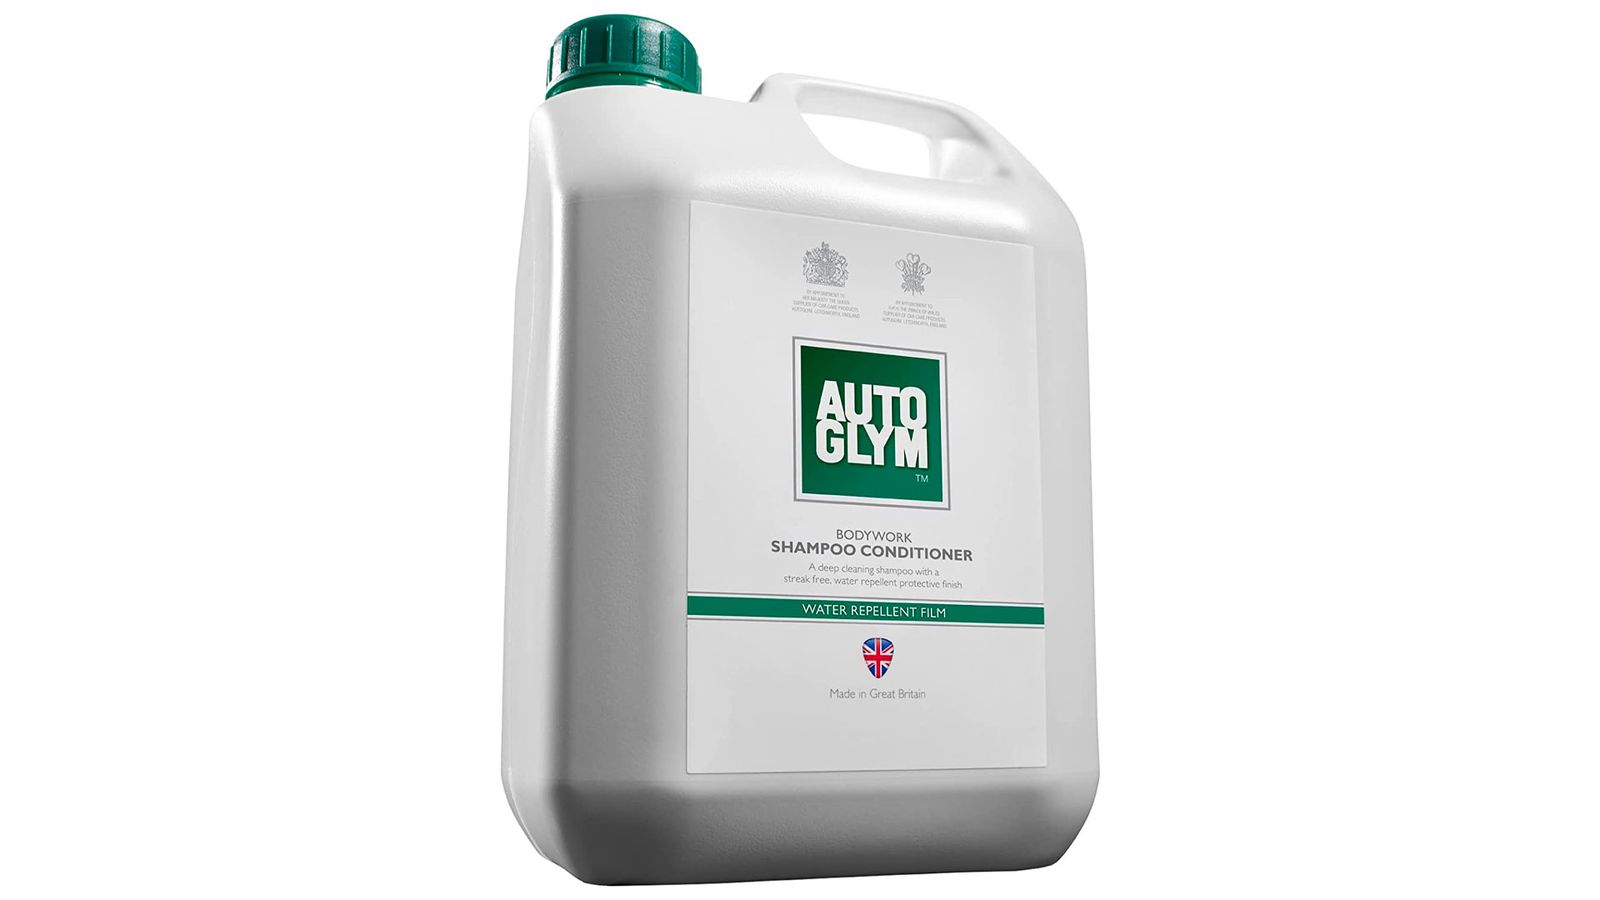 Autoglym Bodywork Shampoo Conditioner product image of a white bottle with a green label and cap.